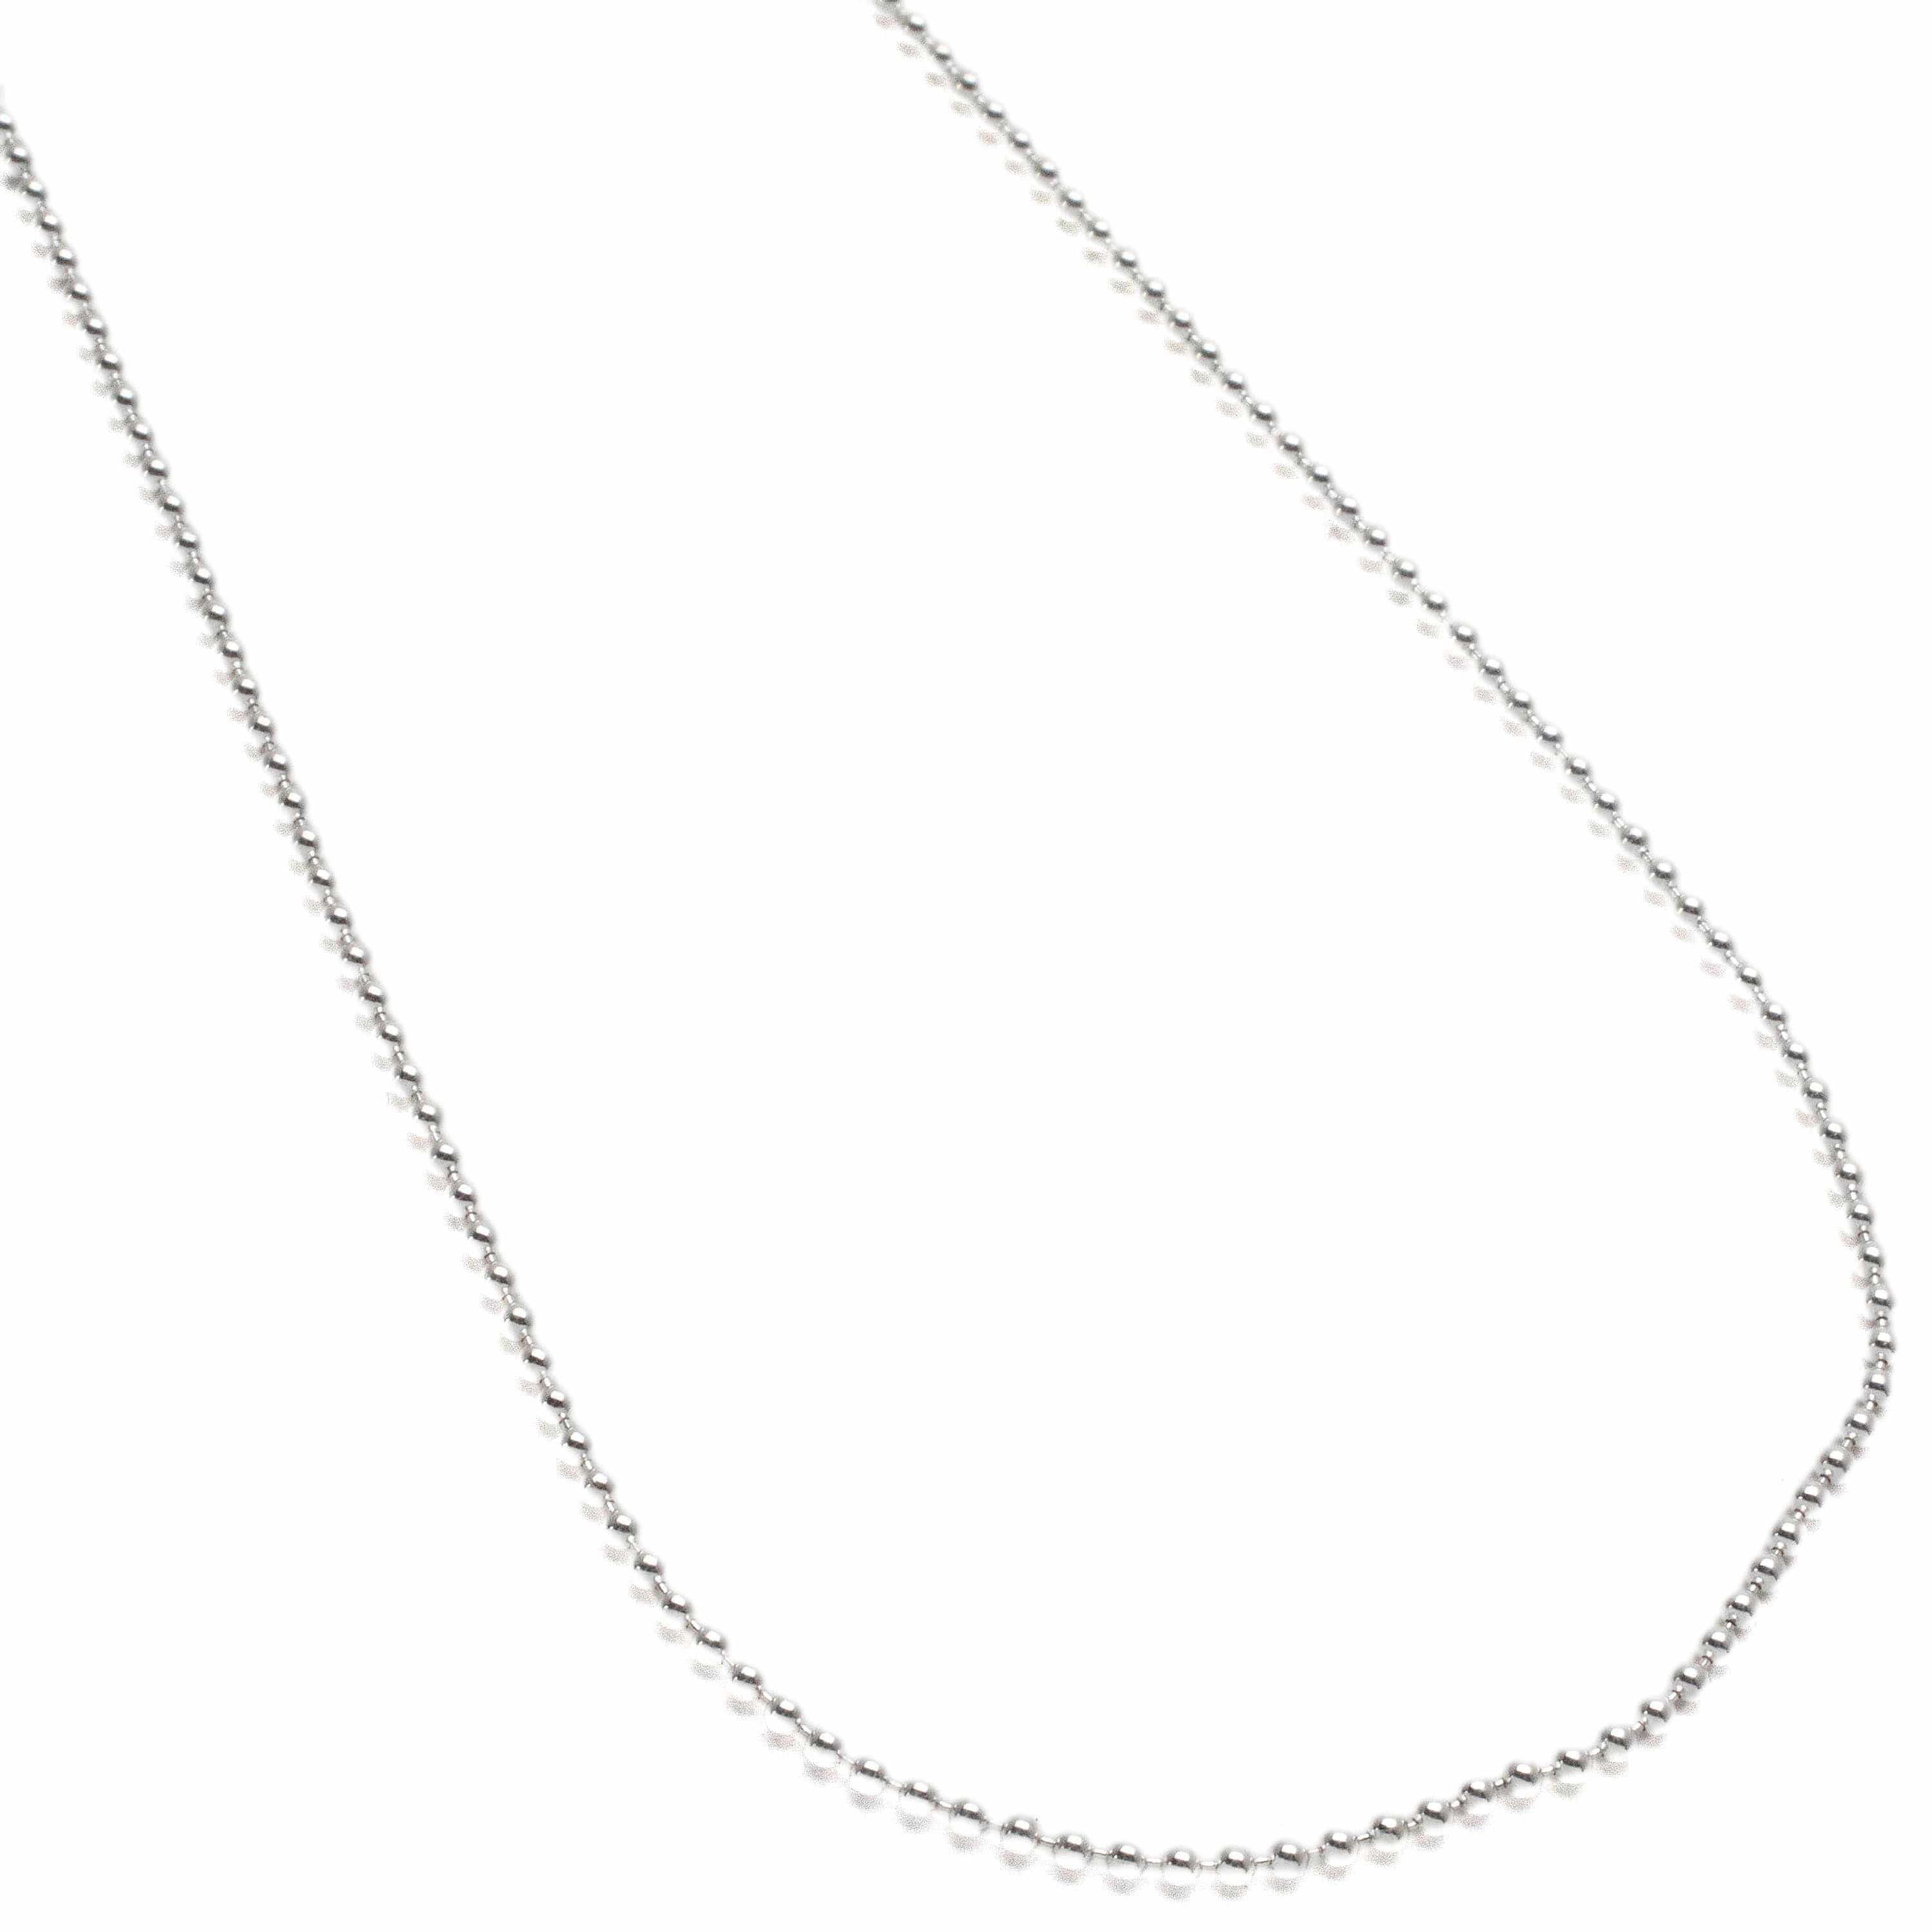 Kalifano Sterling Silver Chains 18" Italian Sterling Silver Round Beaded Chain Necklace 1.5mm SC-BD150-18